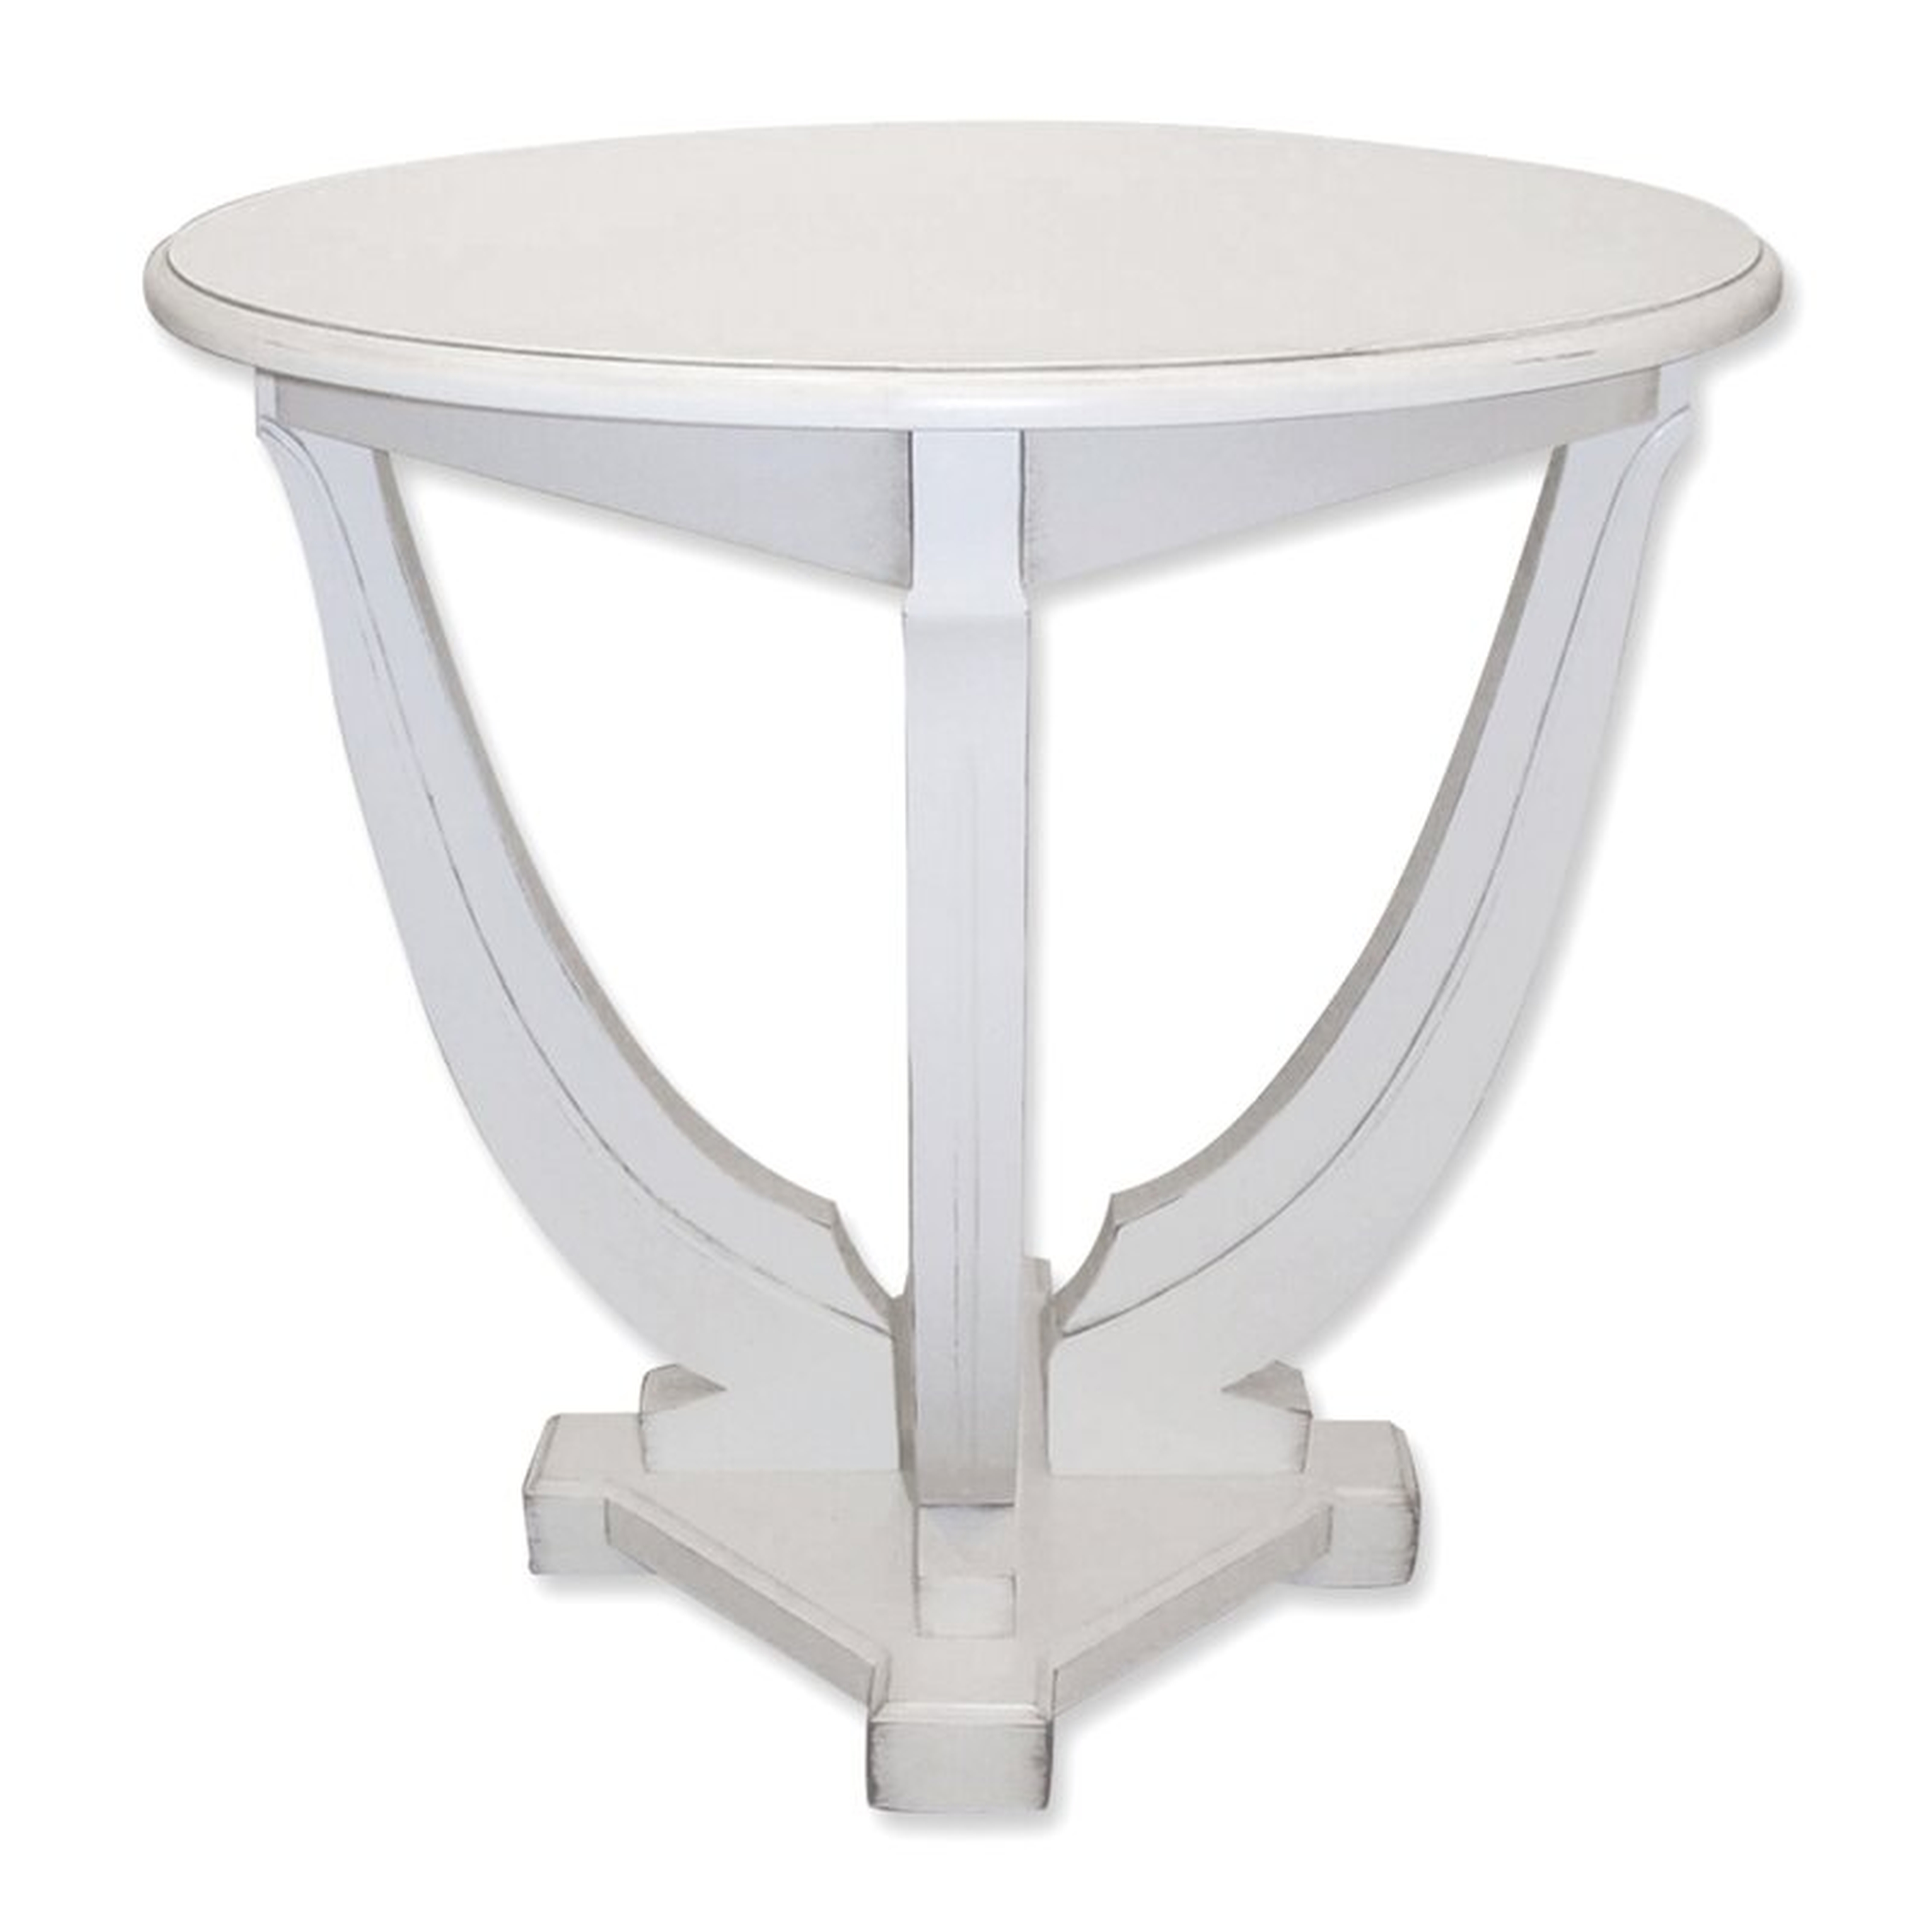 Trade Winds Furniture Milan Round End Table Color: White - Perigold